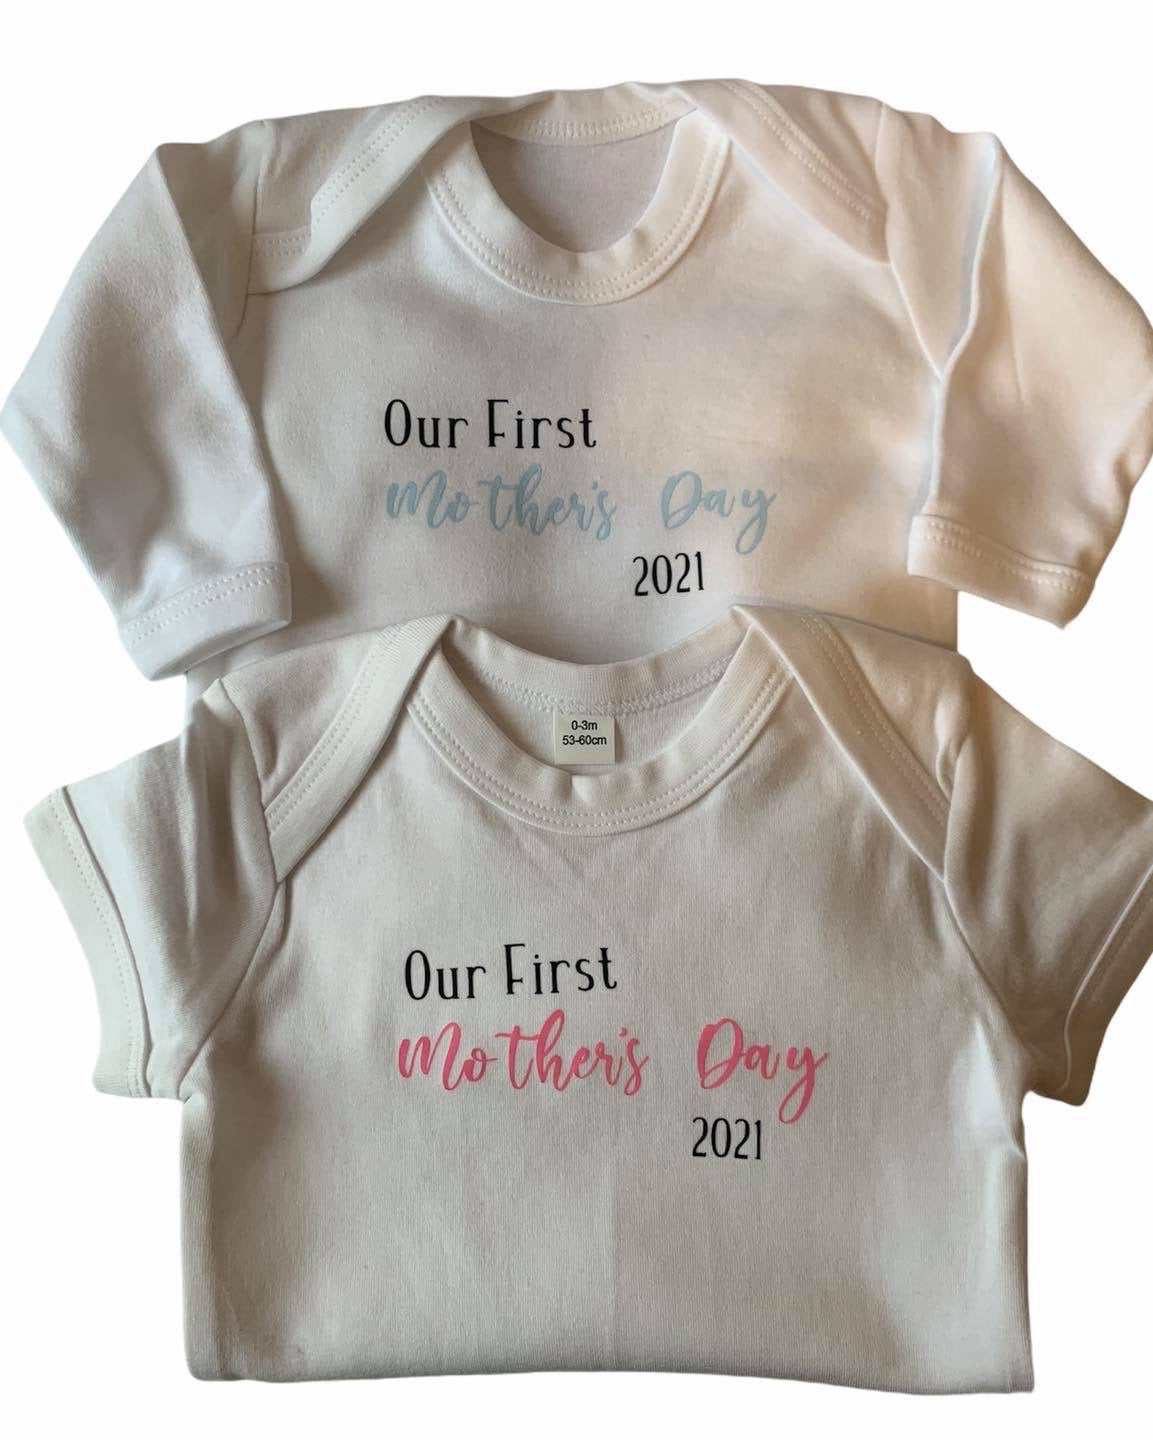 Mother’s Day baby vest